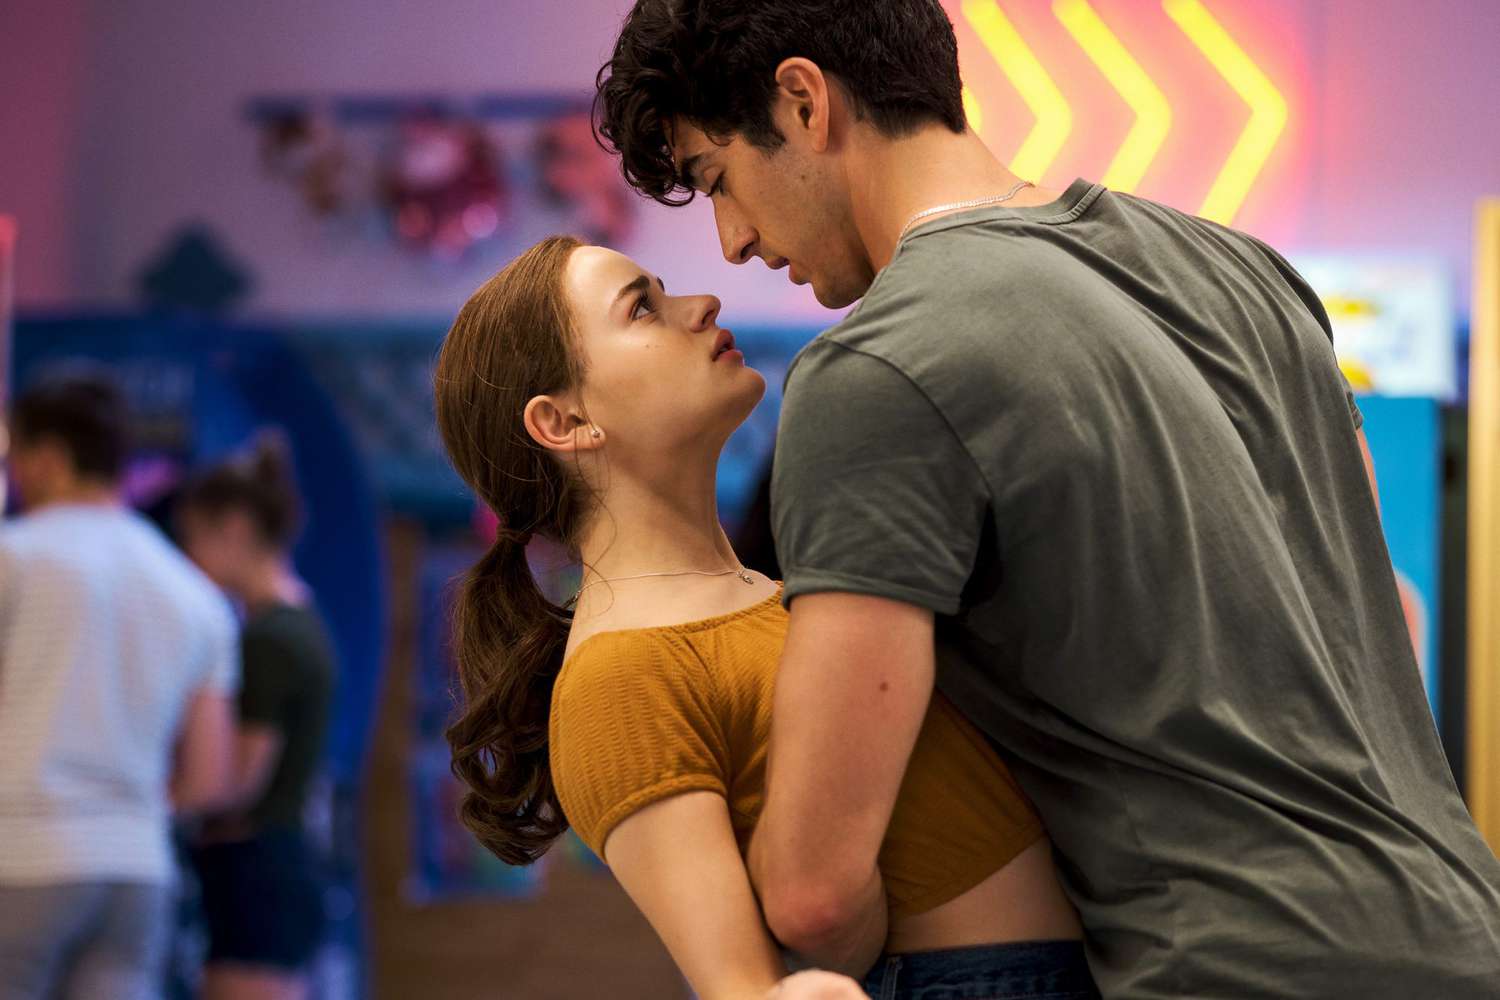 Joey King as Shelly 'Elle' Evans, Taylor Perez as Marco of The Kissing Booth 2